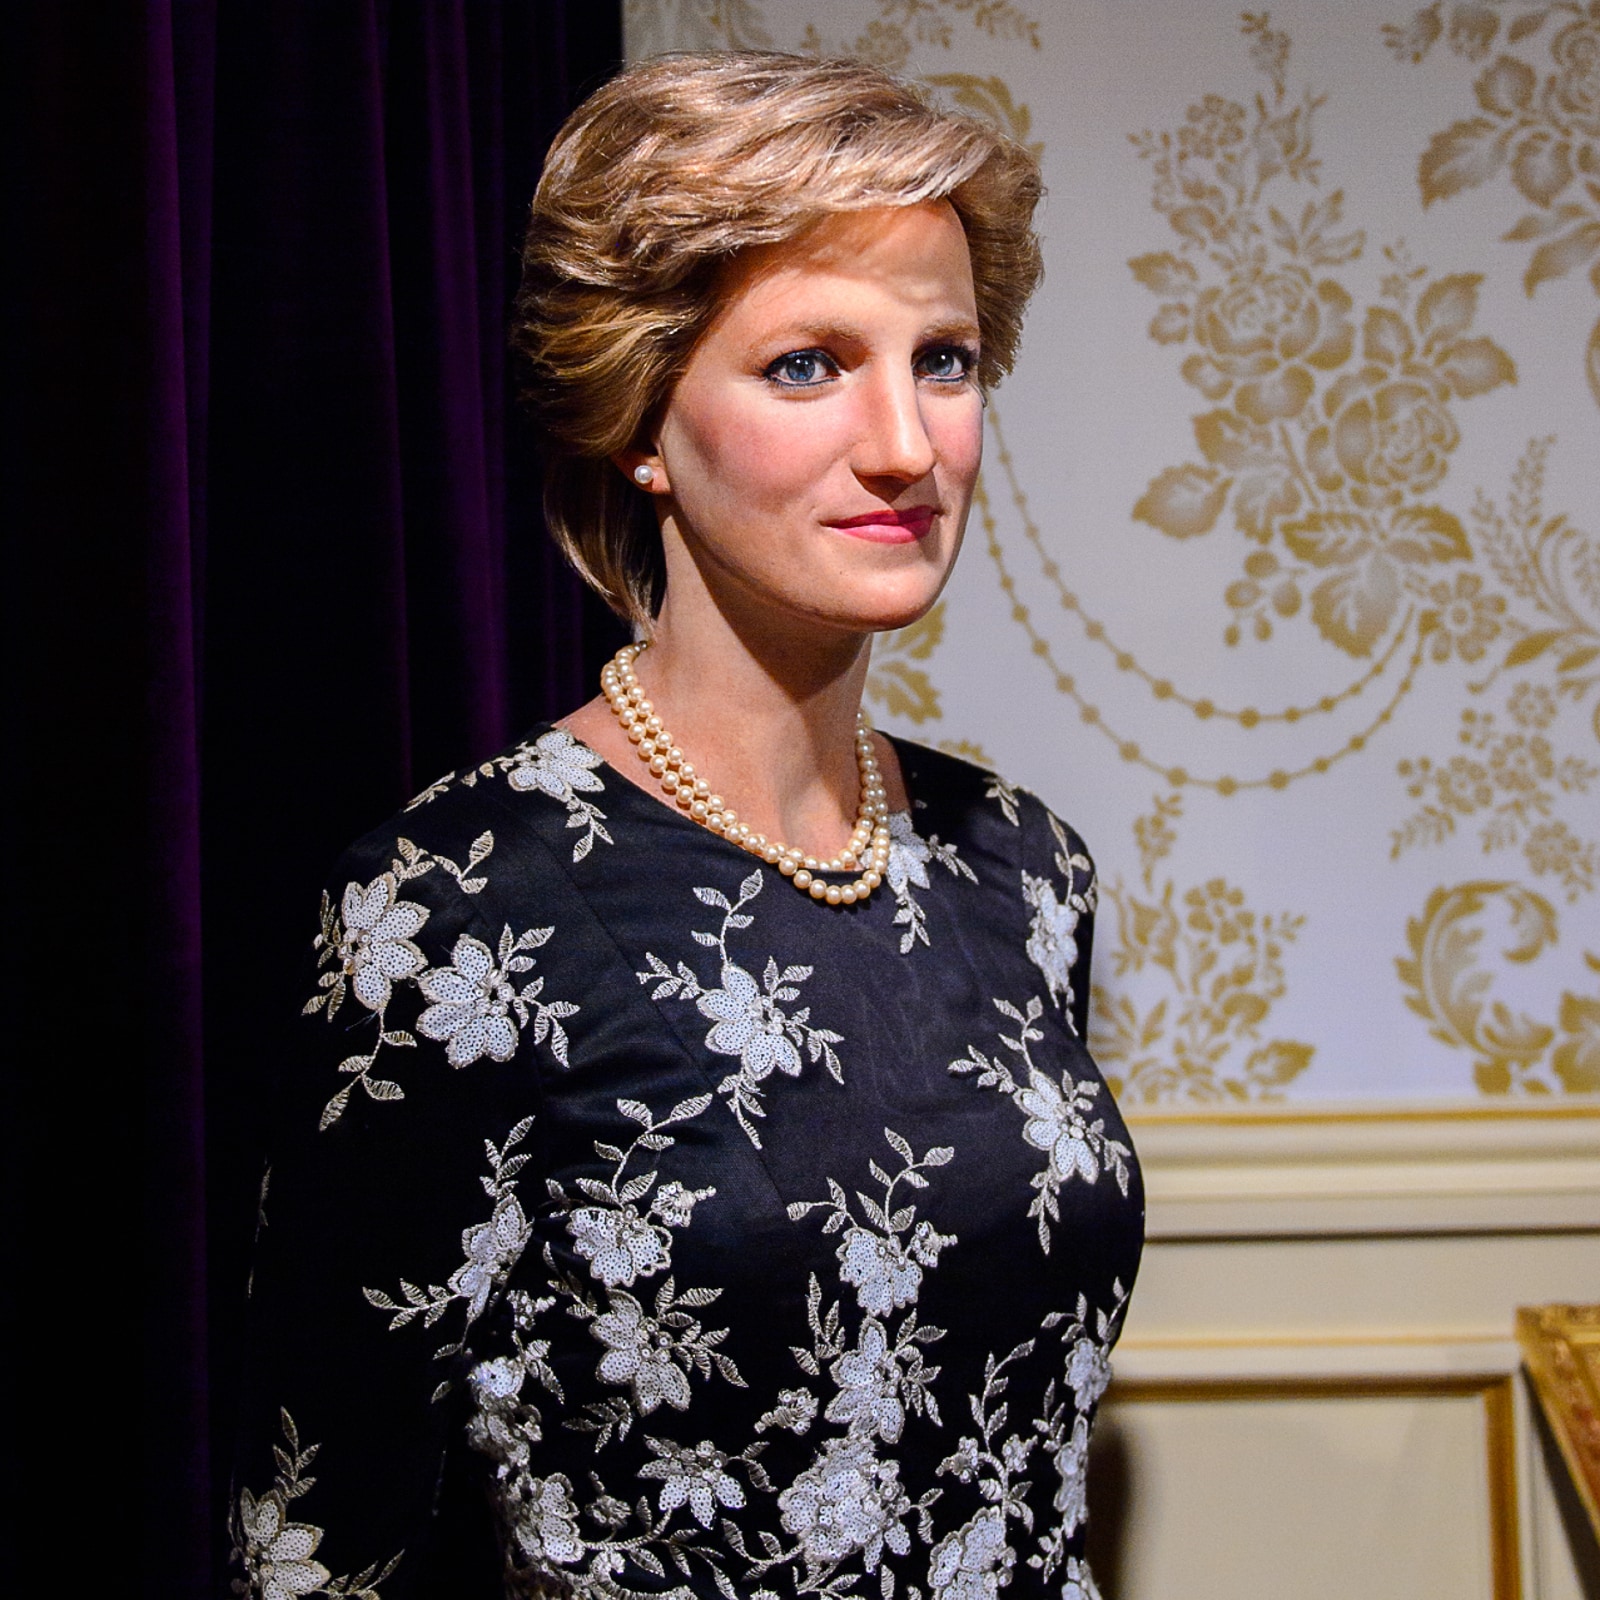 Did You Know Princess Diana Refrained From Wearing Chanel? Find